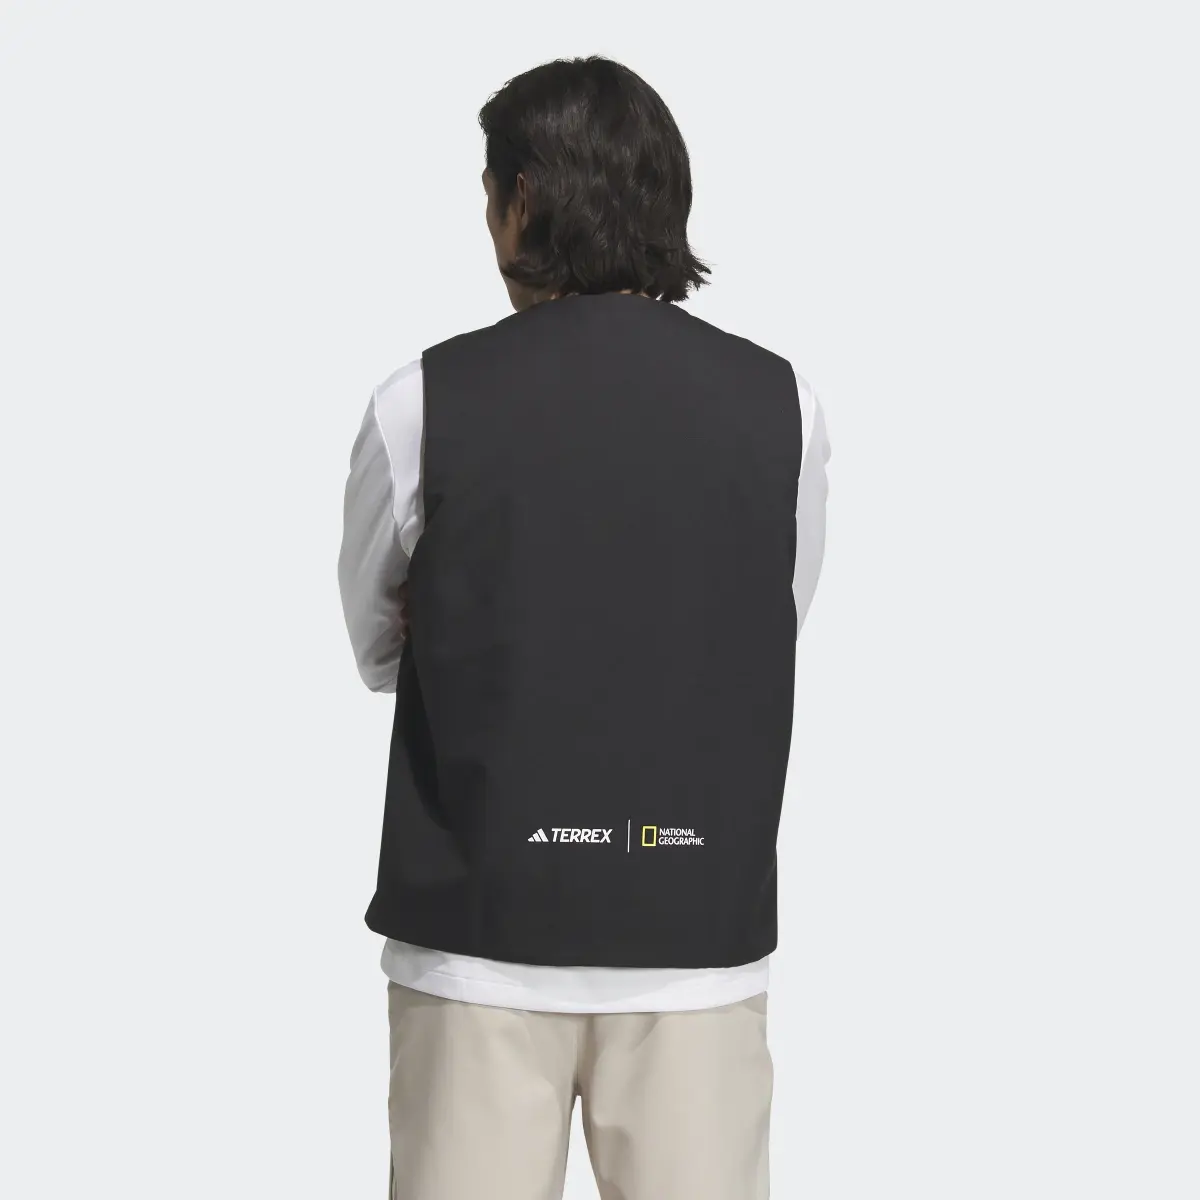 Adidas National Geographic Fleece-Lined Vest. 3